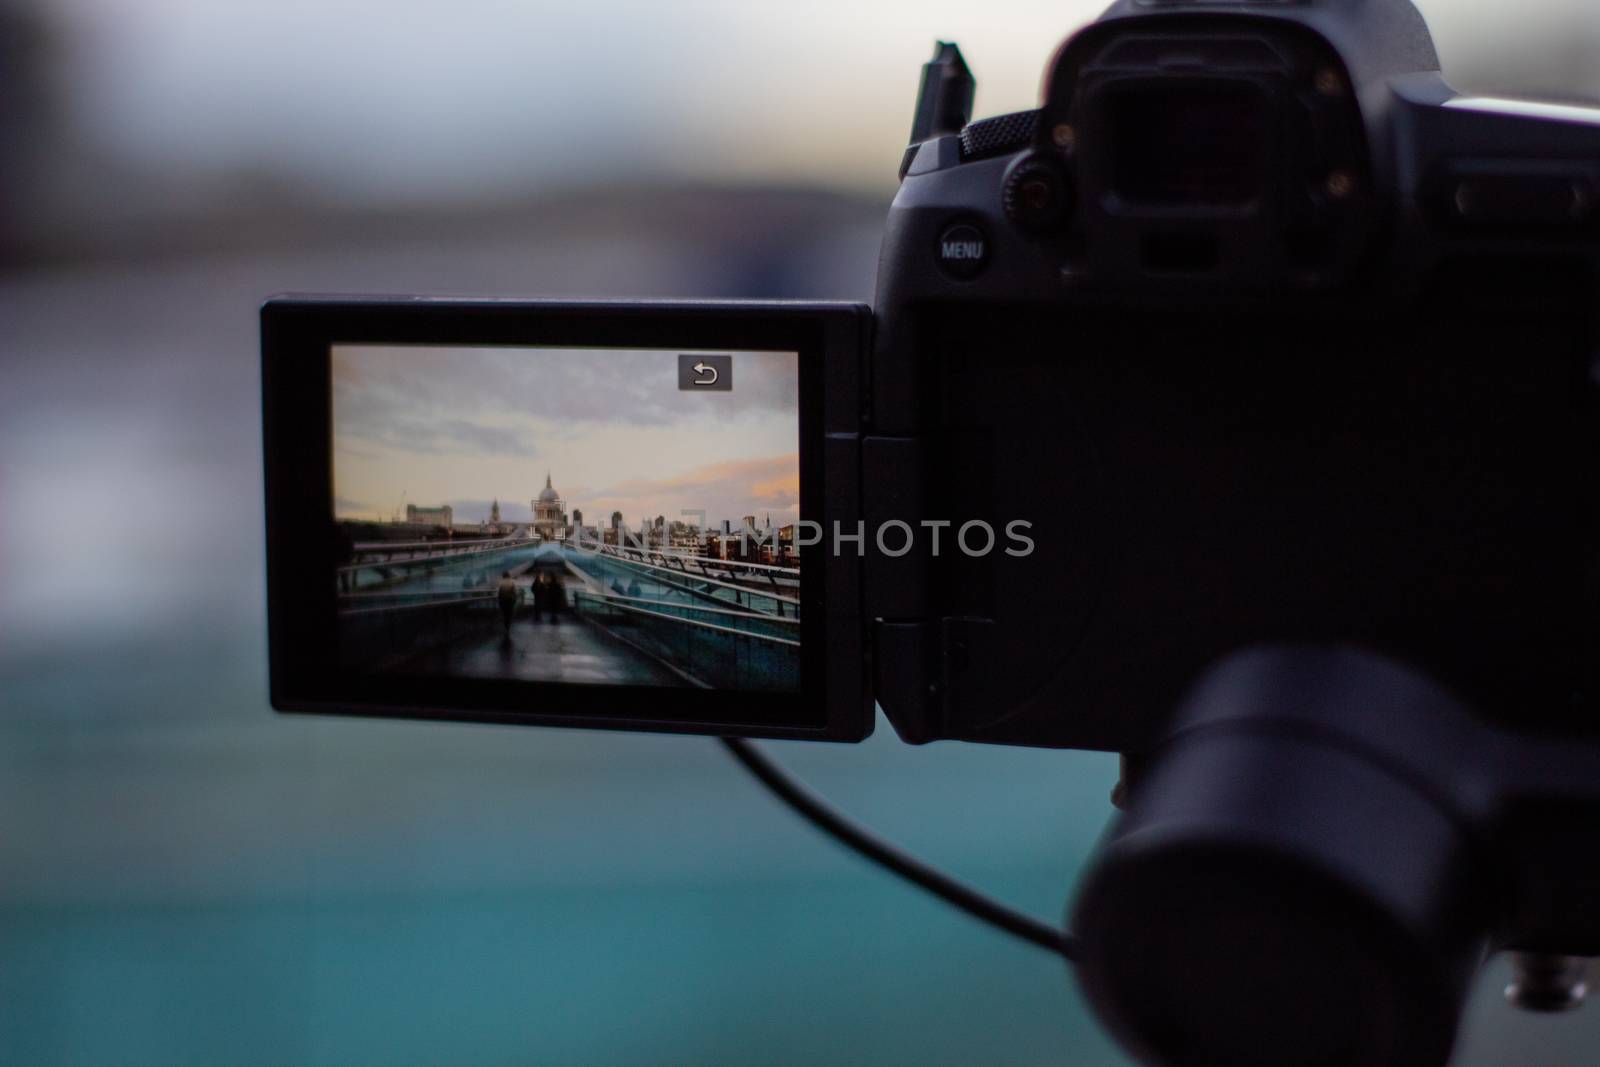 Millennium Bridge ramp and Saint Paul Cathedral on screen of digital camera recording. Camera capturing a cityscape from London. Photography and video equipment